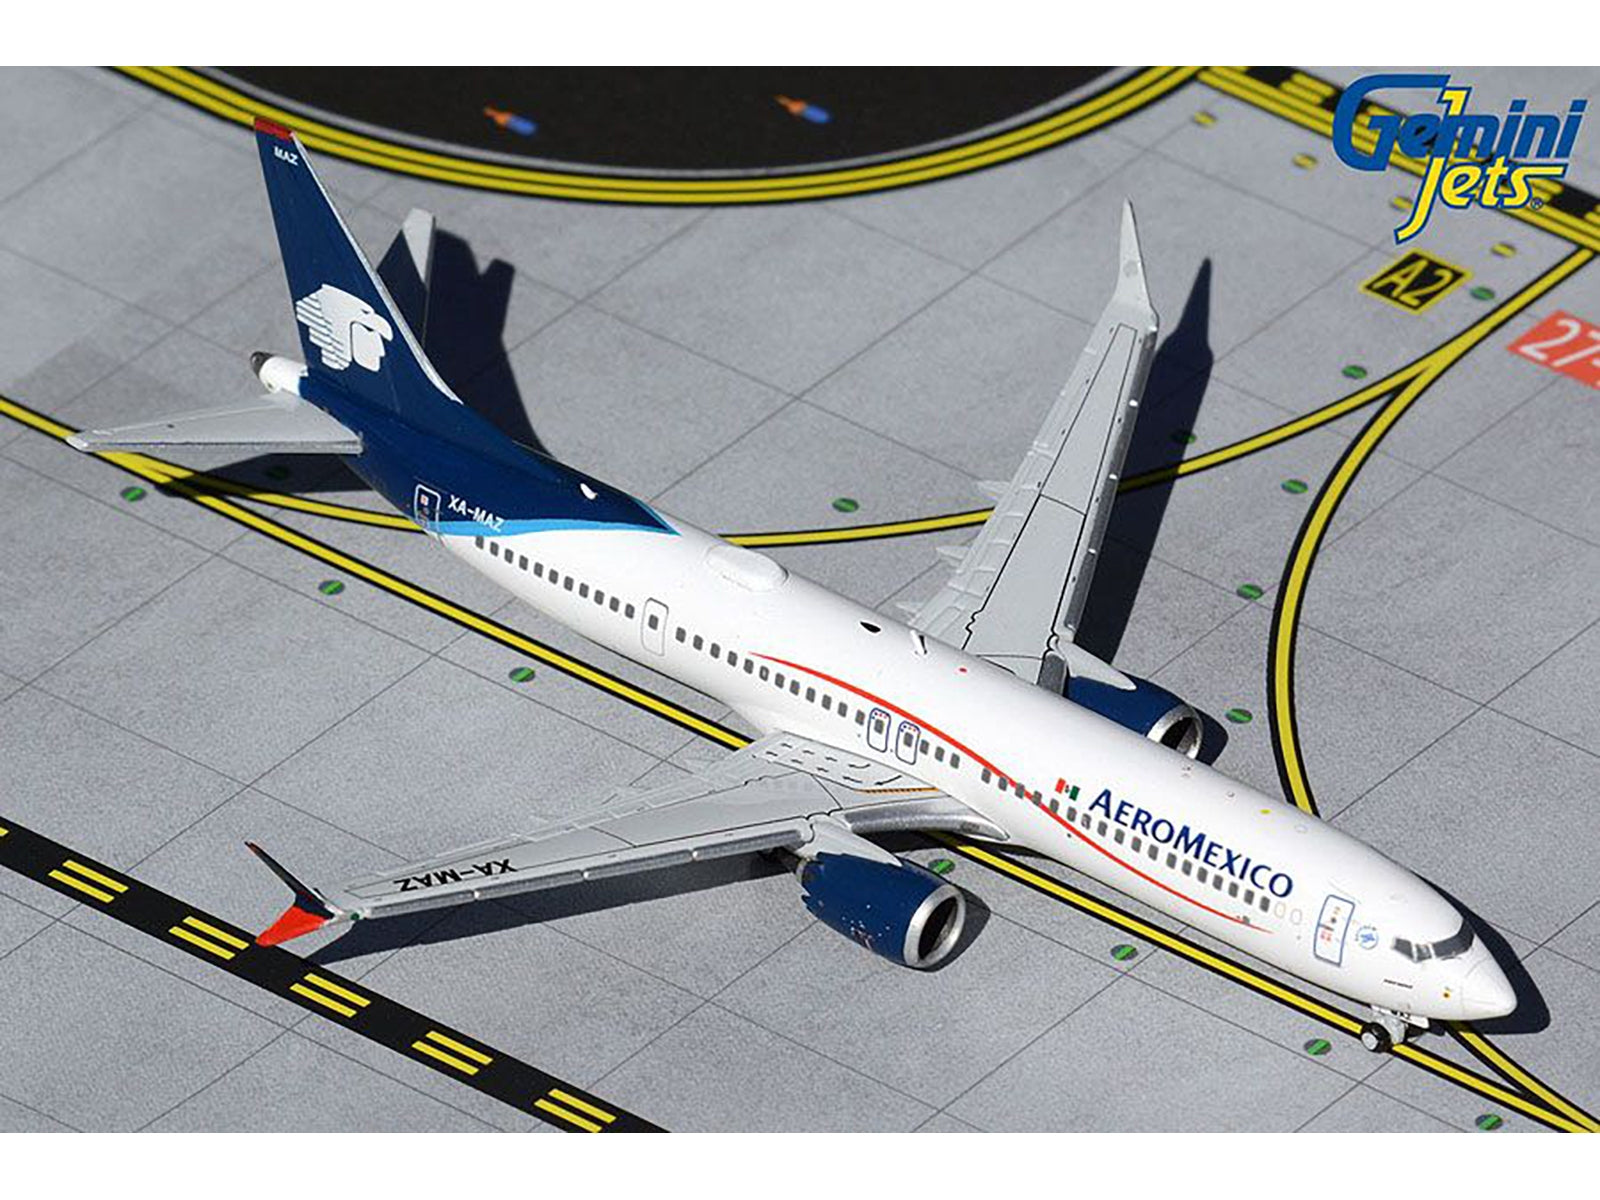 Boeing 737 MAX 9 Commercial Aircraft "AeroMexico" White and Blue 1/400 Diecast Model Airplane by GeminiJets